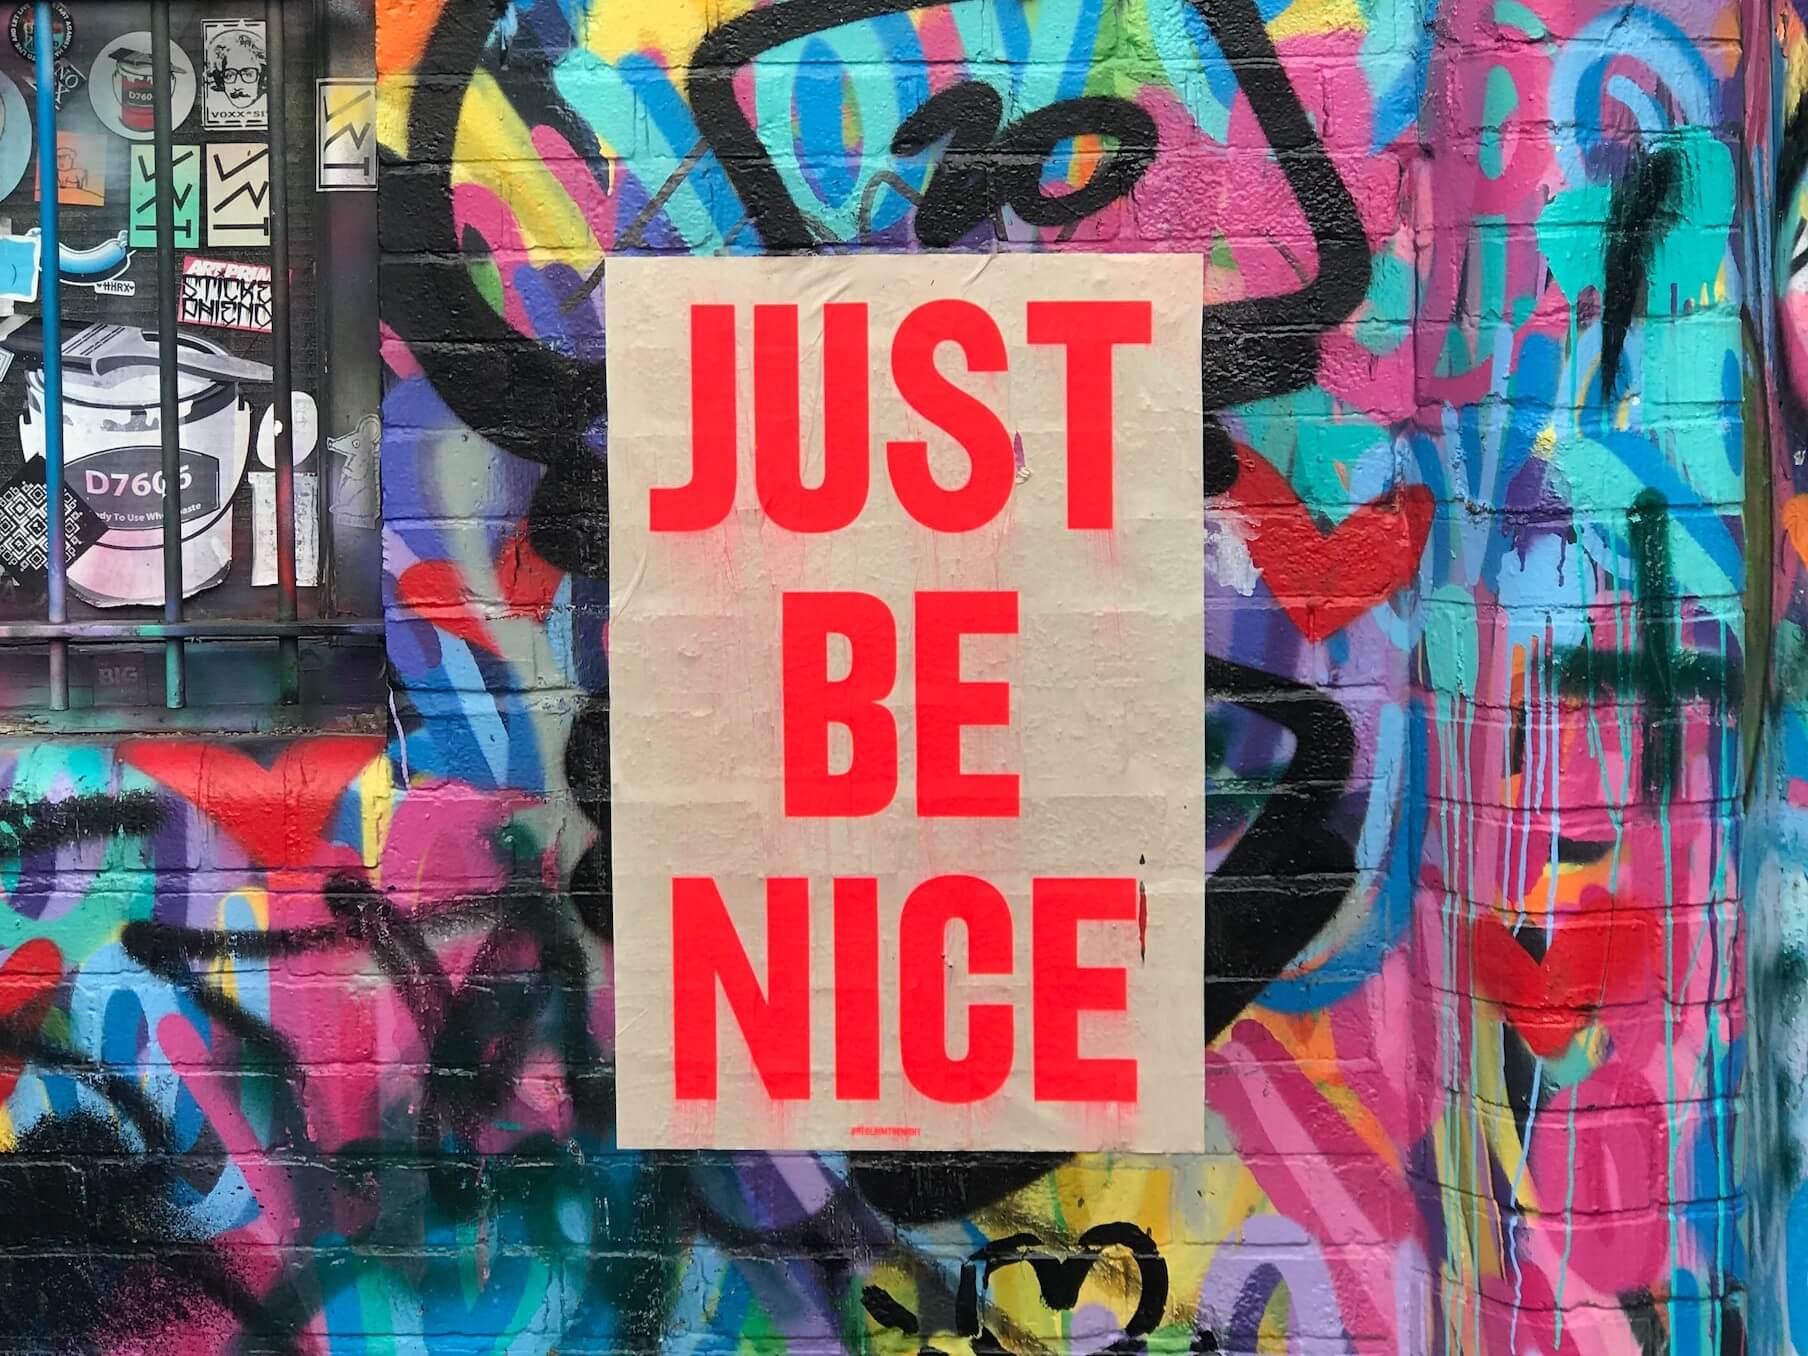 "Just be nice" sign on wall with graffiti